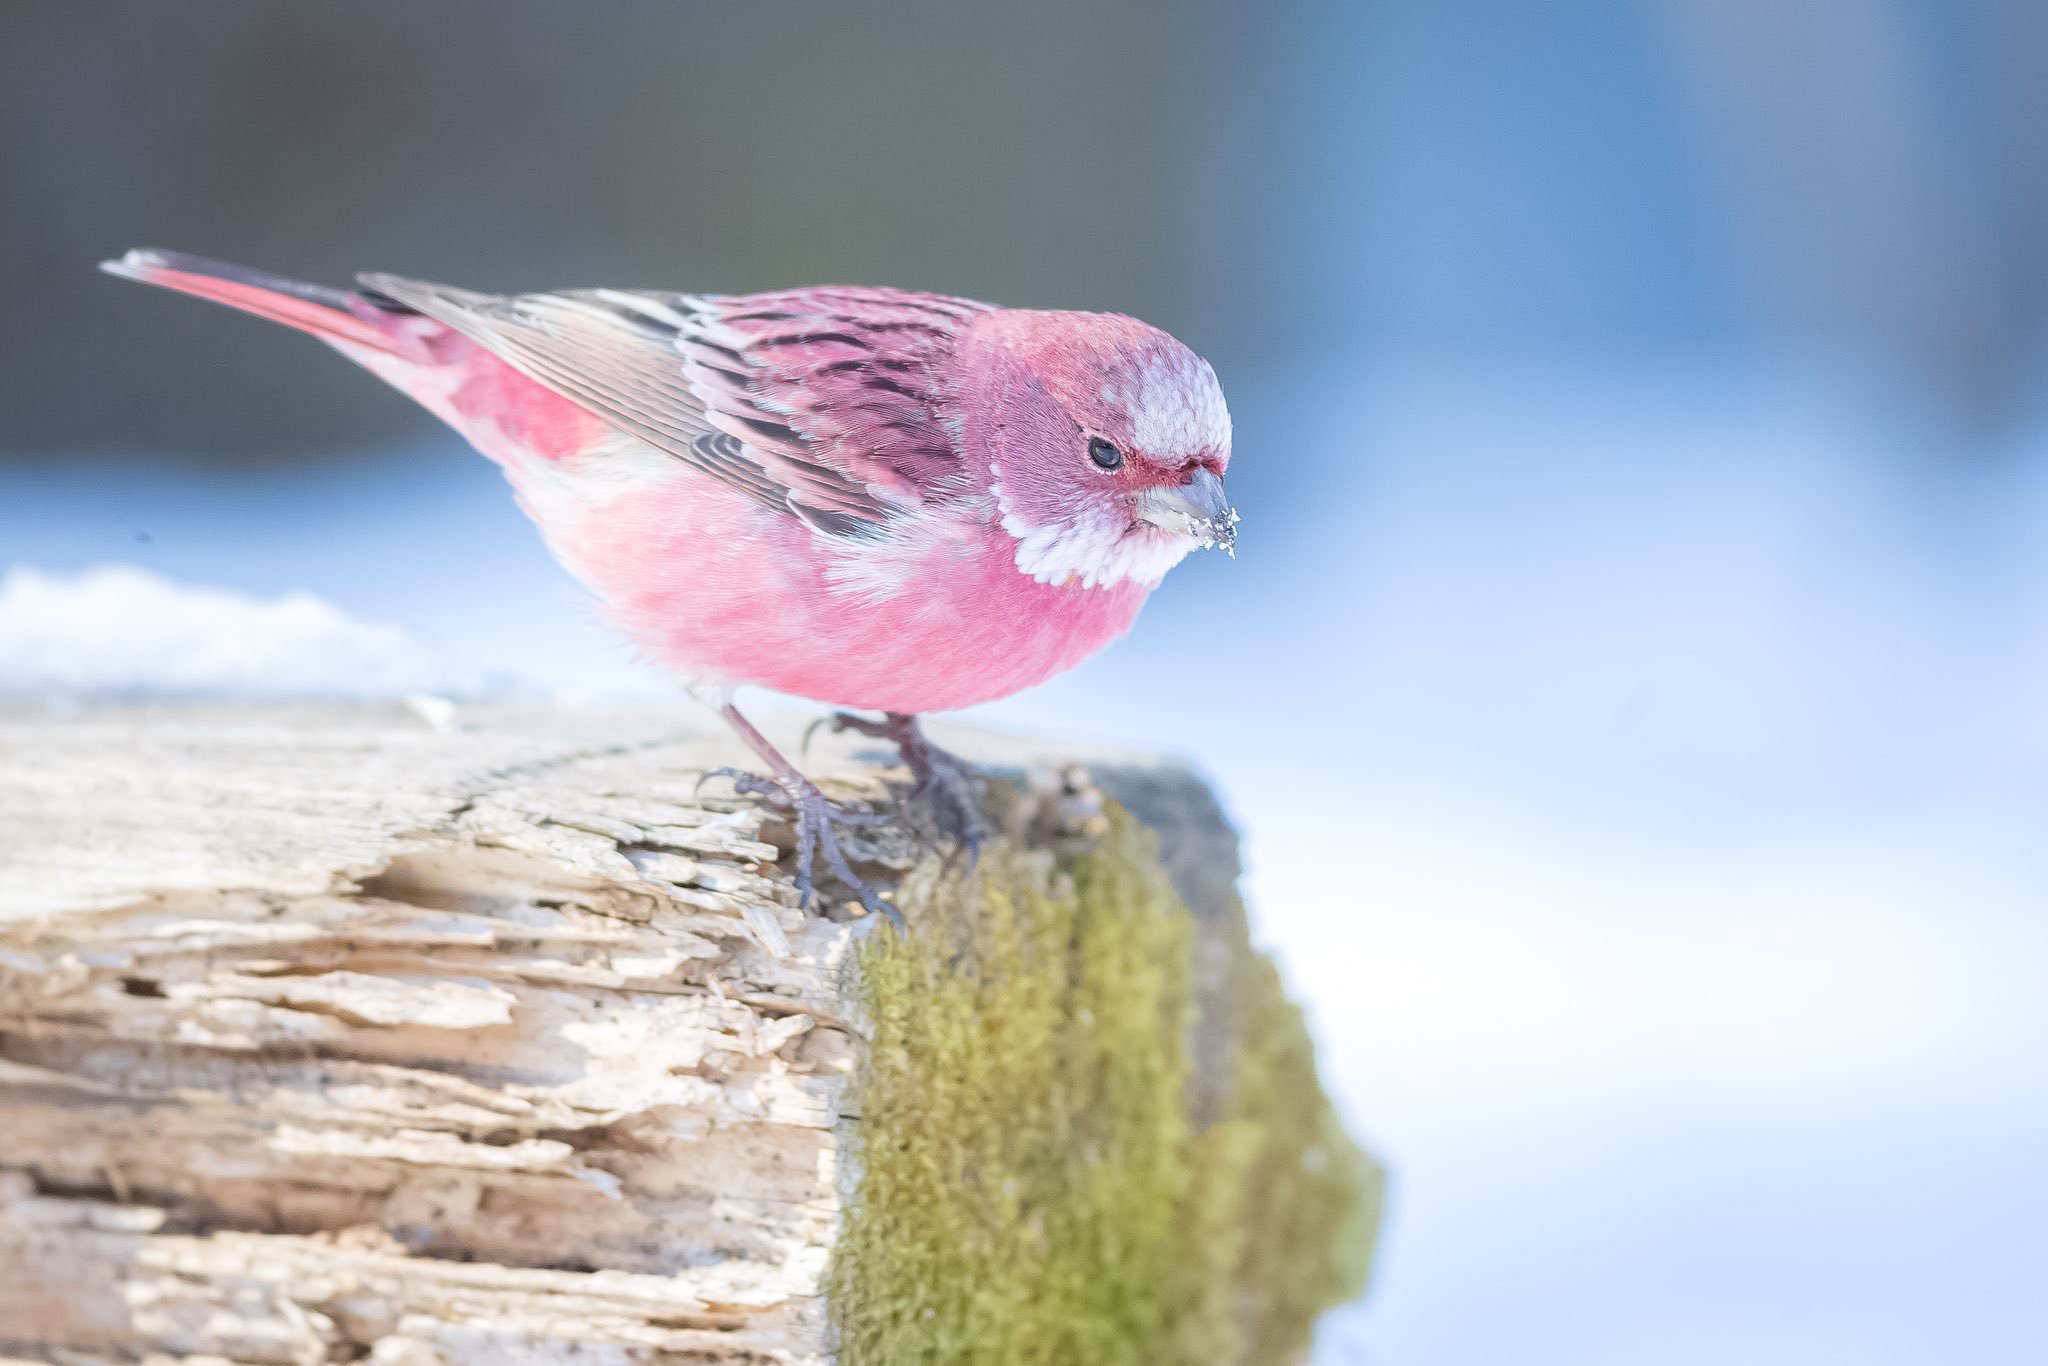 This pink bird is called the Rose finch and it looks like cotton ...